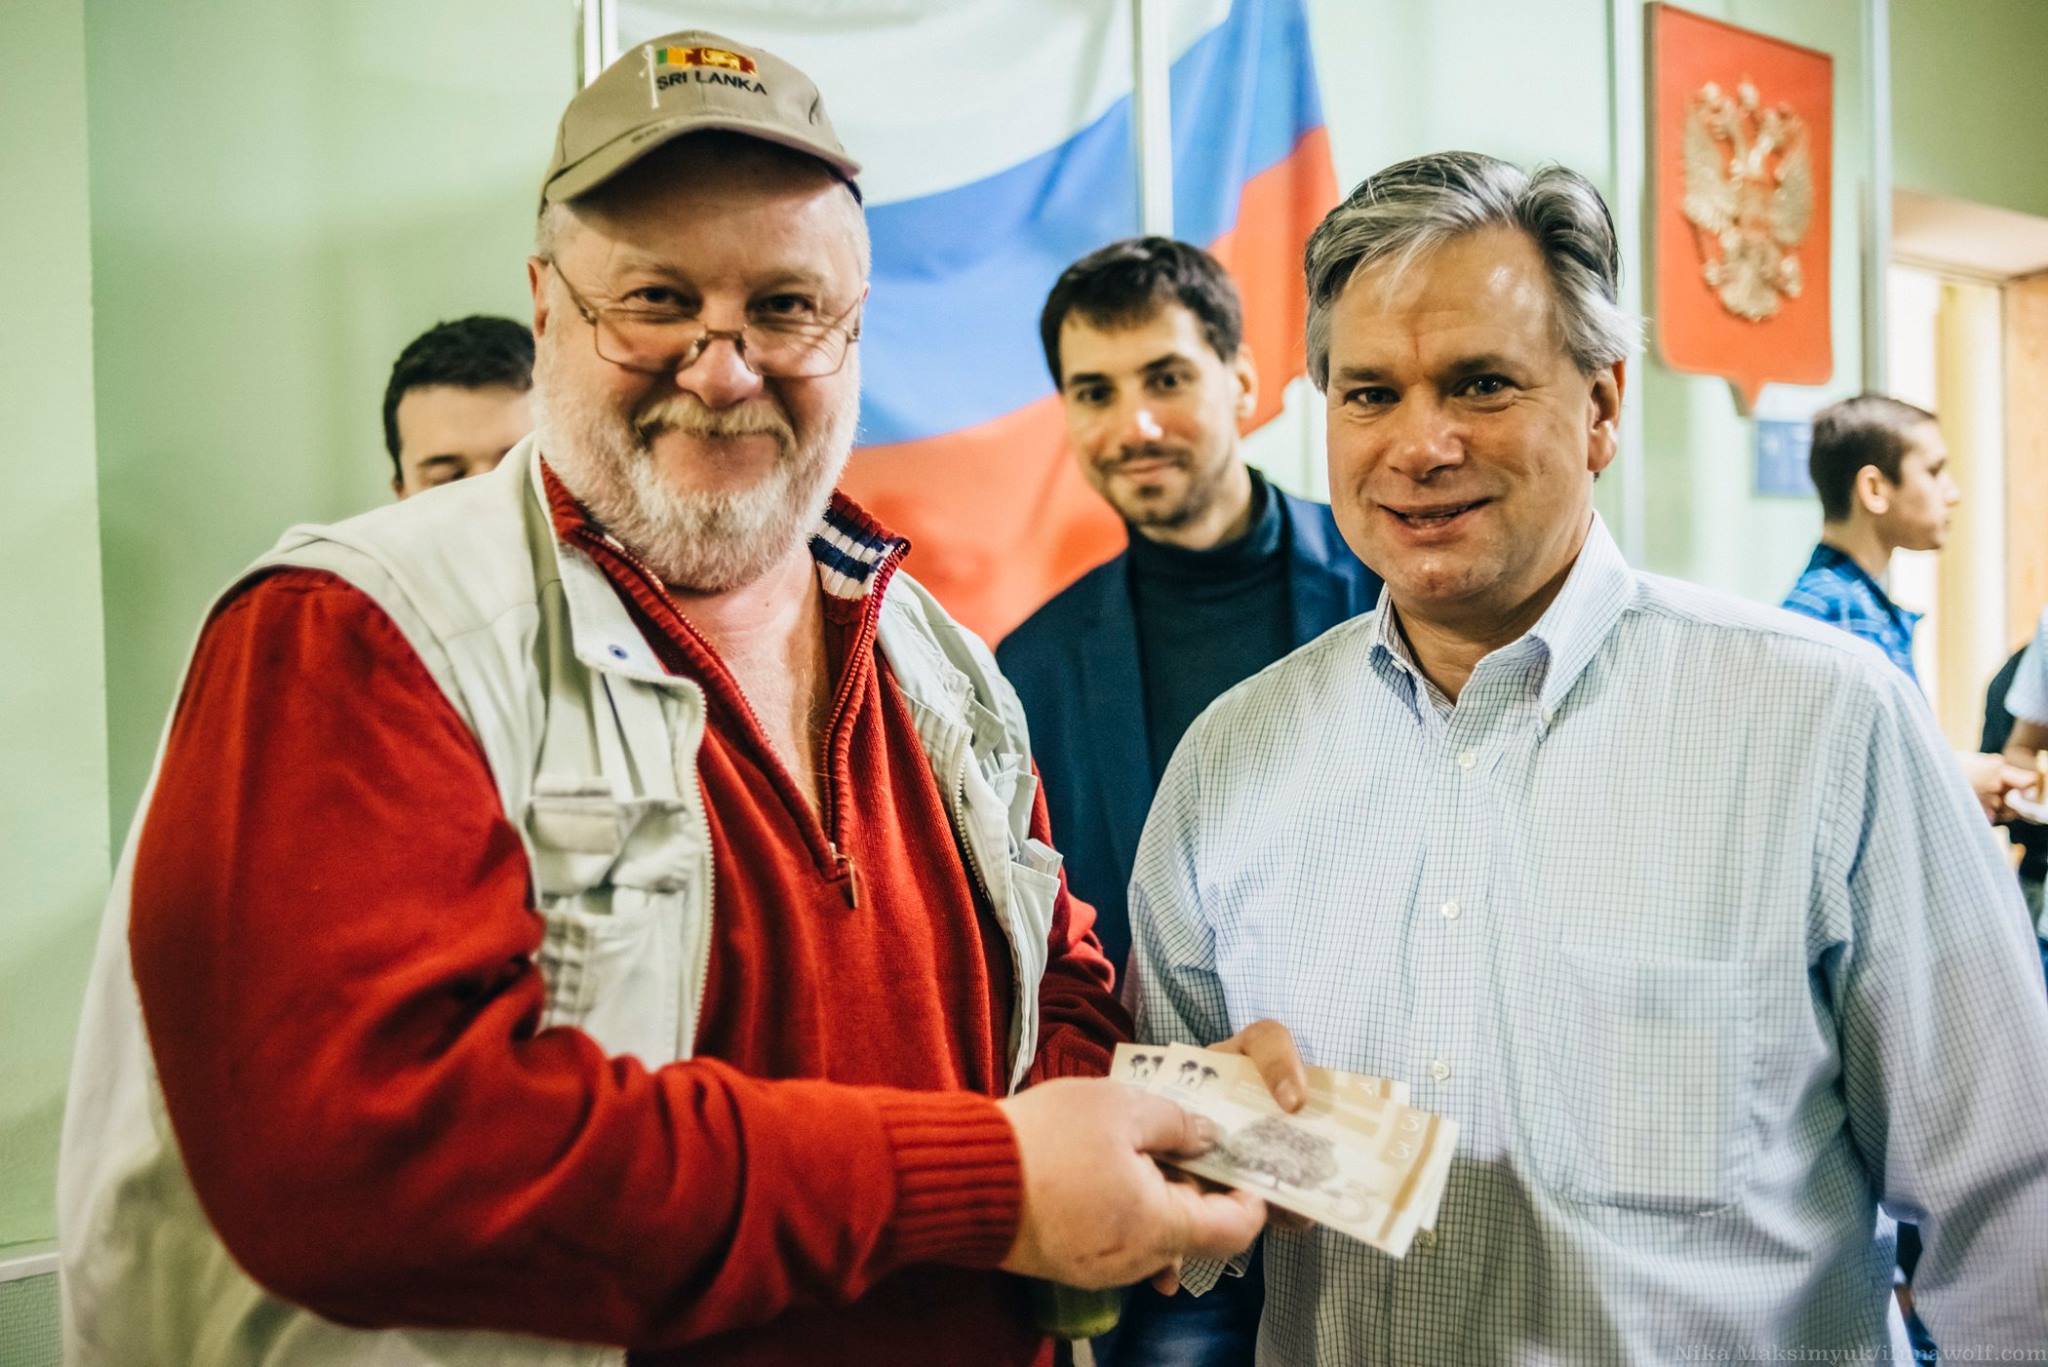 Shlyapnikov has been trying to create a local economic model for his village that will be more effective and more just.